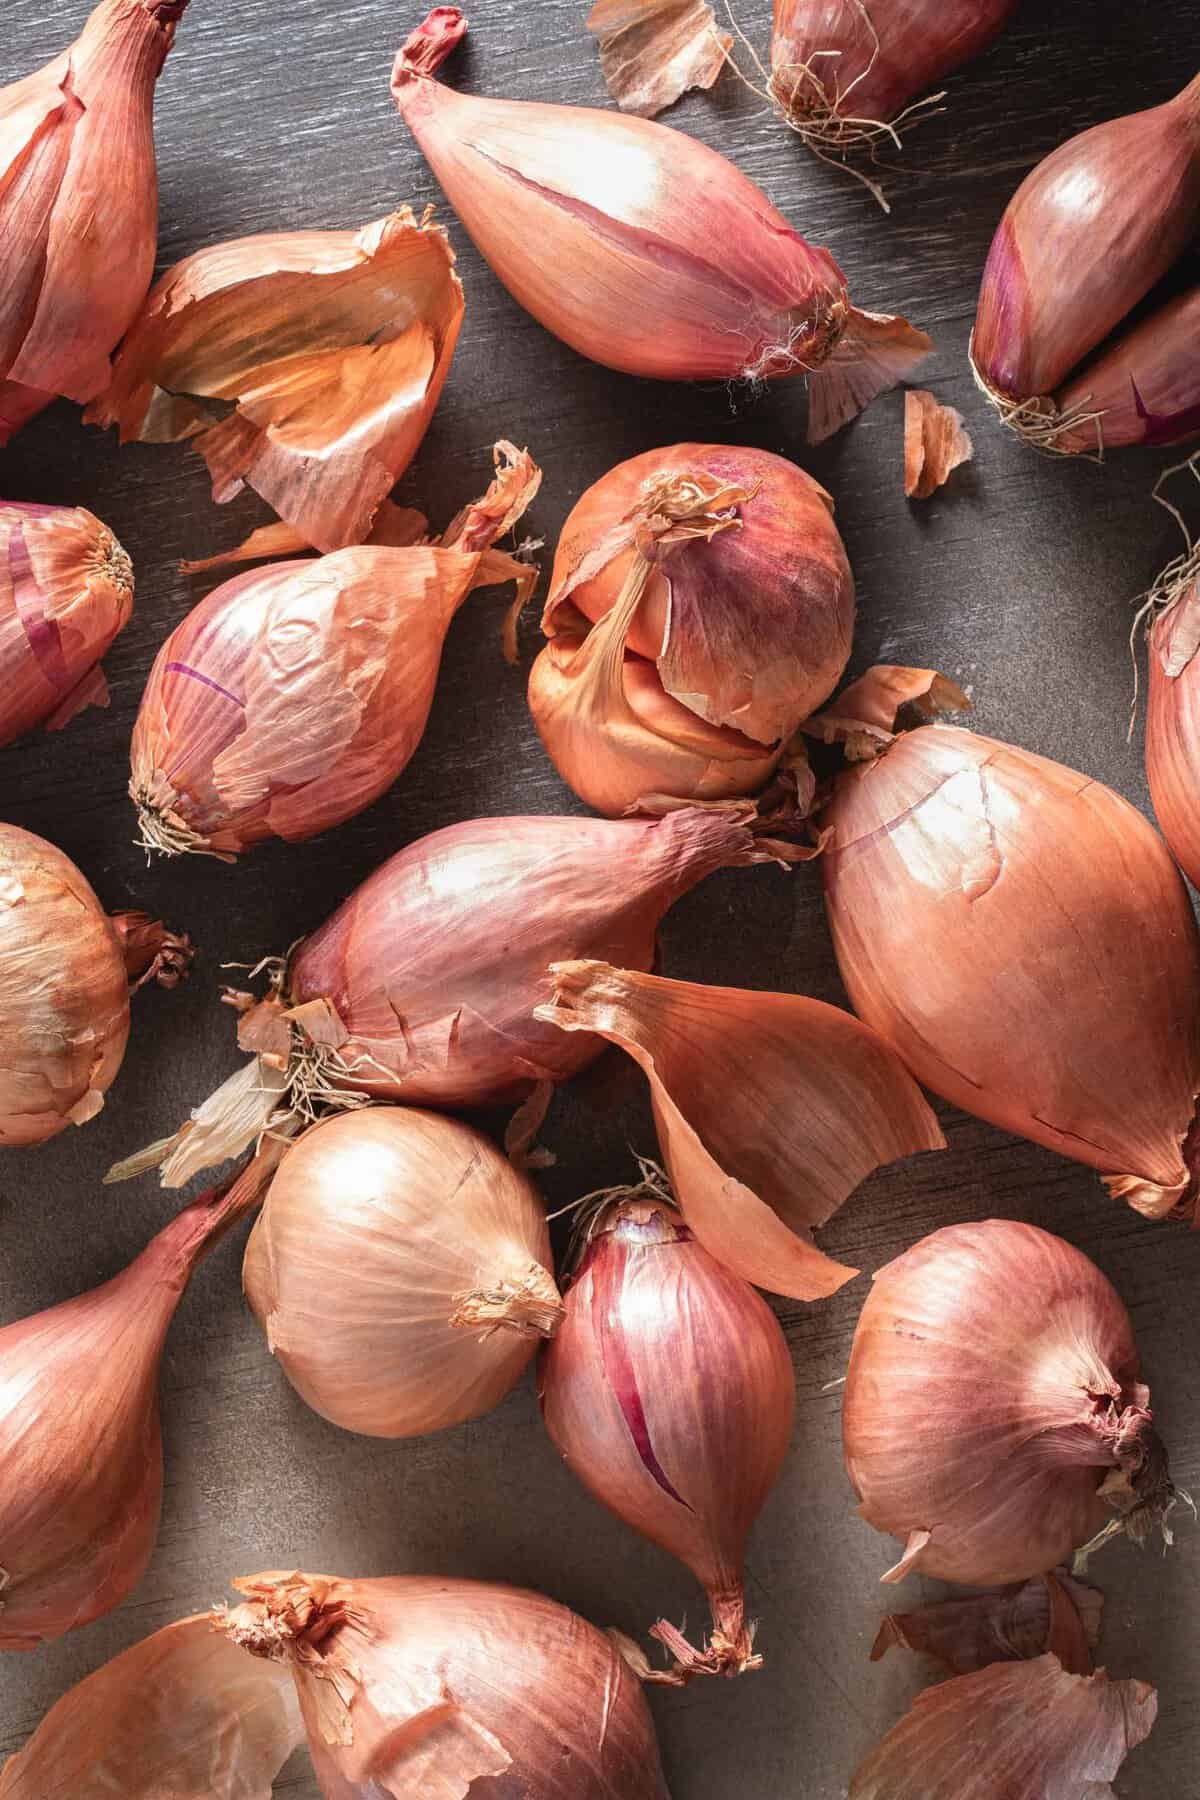 Best Shallots Substitute (9 Super Easy Shallot Alternatives To Use!)